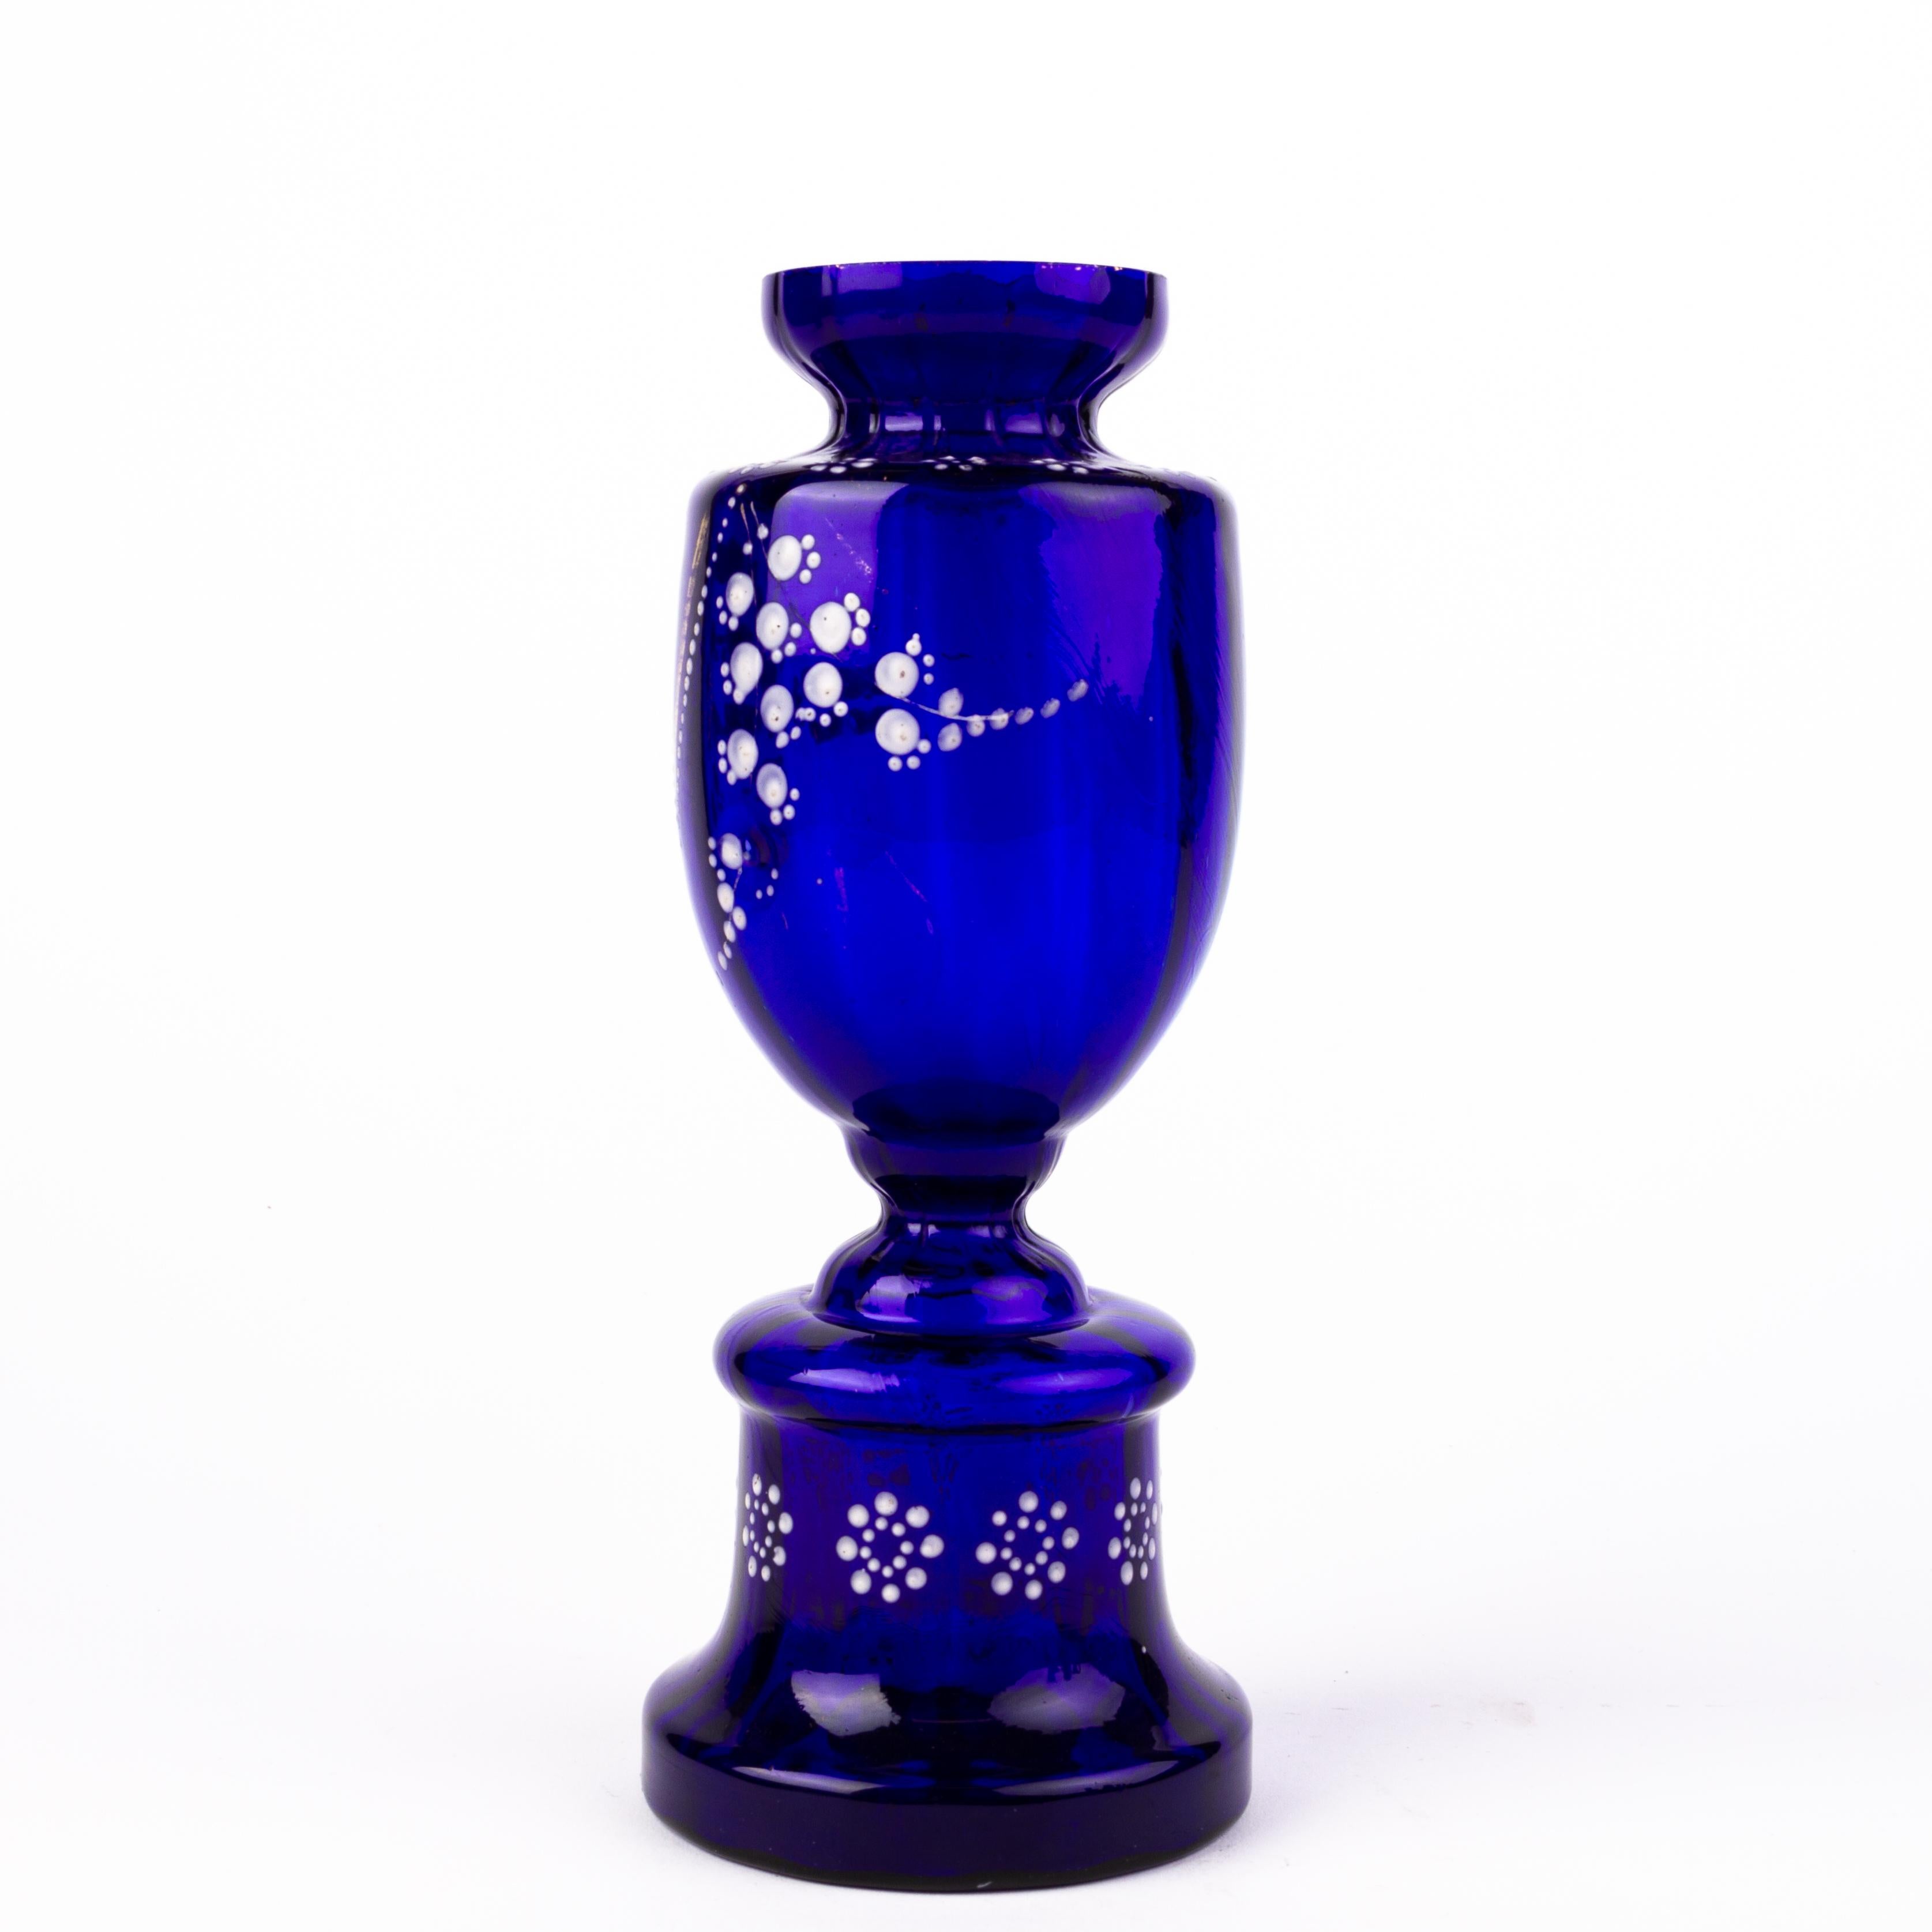 In good condition
From a private collection
Bristol Blue Glass Art Nouveau Urn Vase